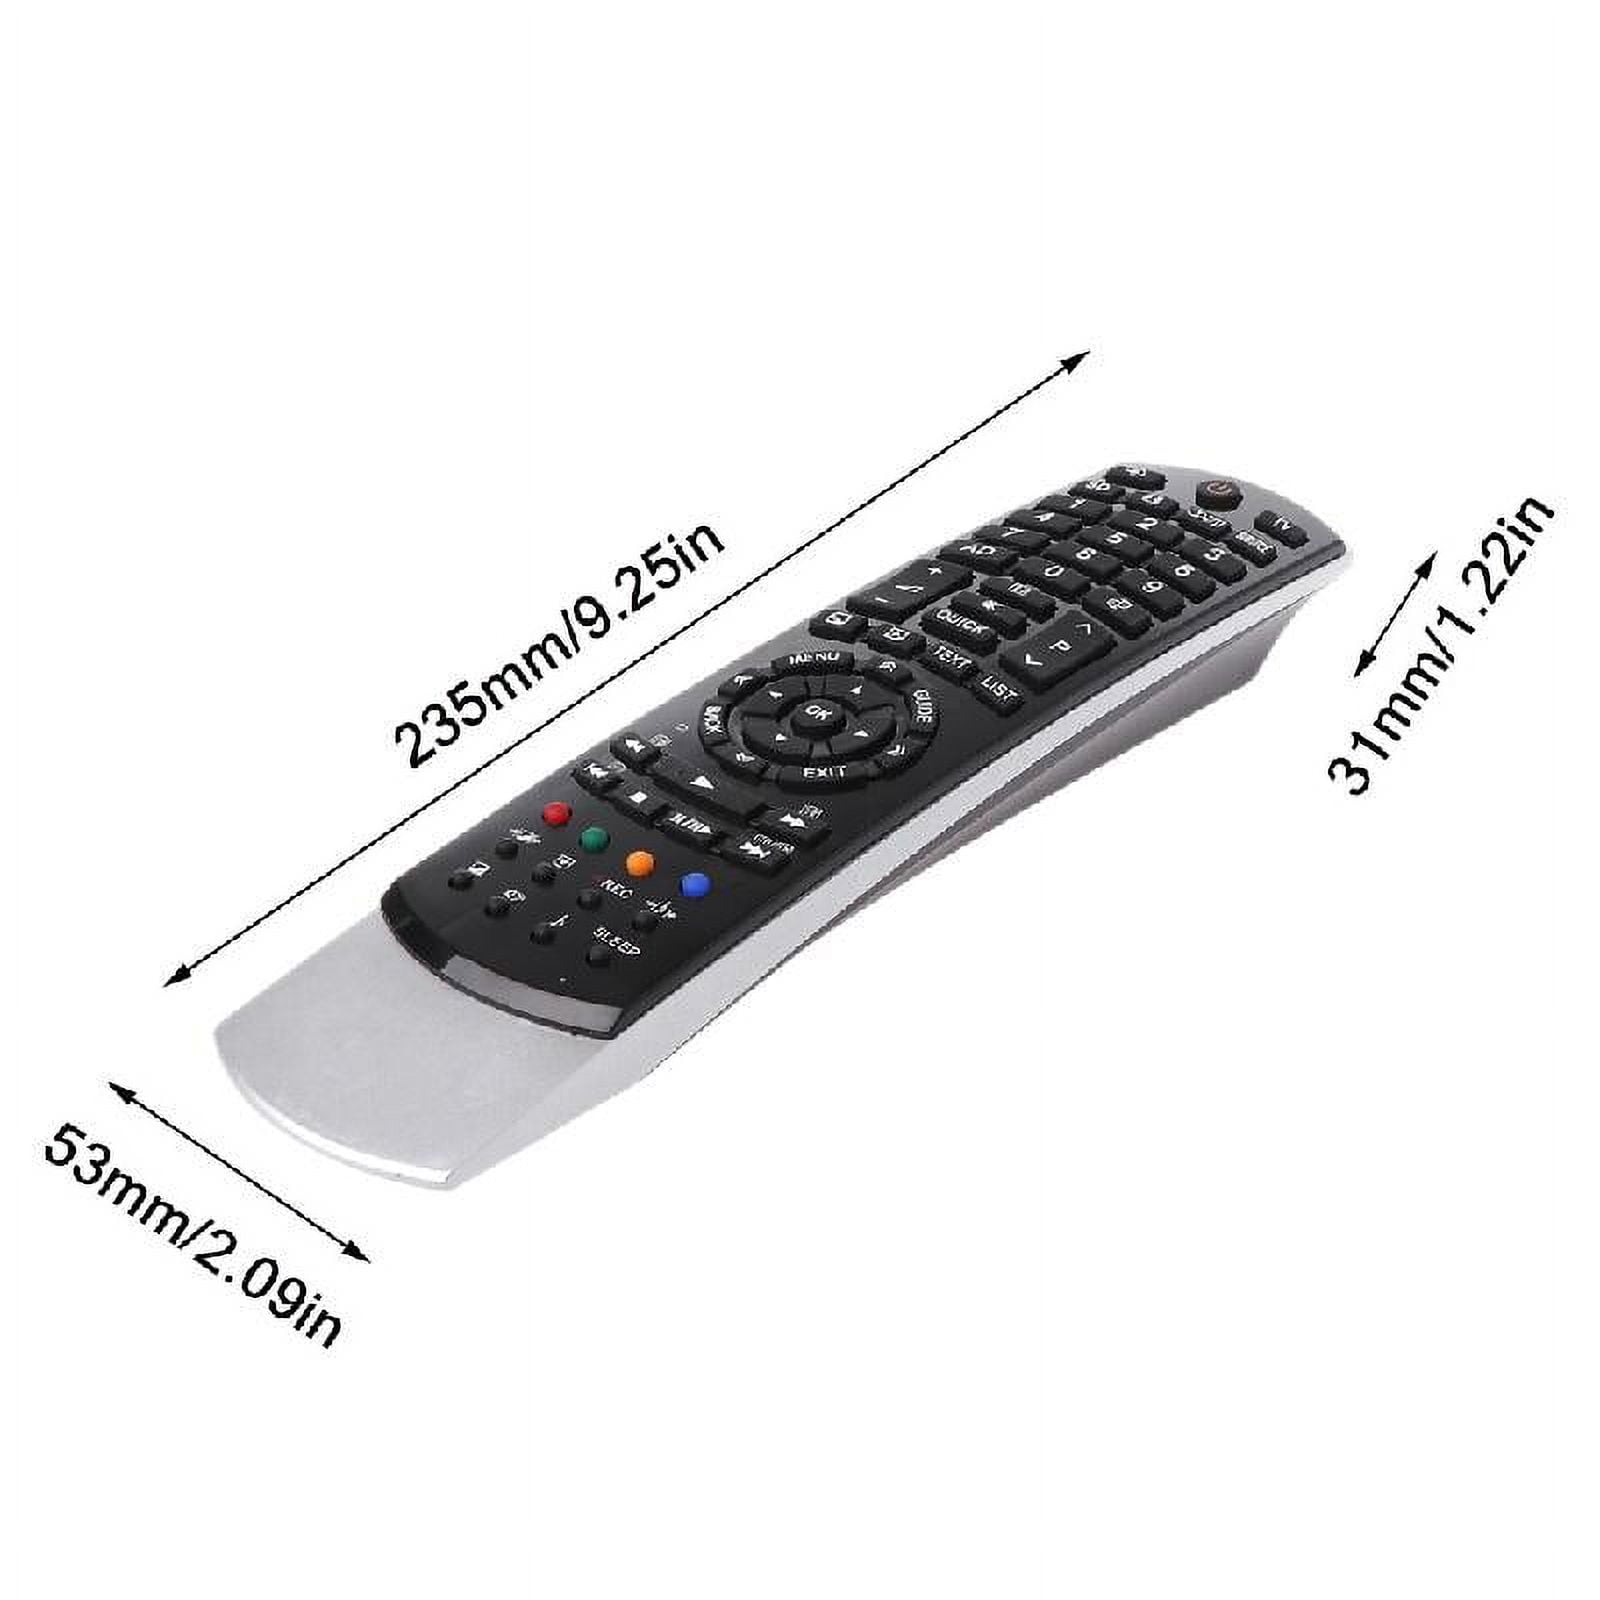 OOKWE CT-90404 Smart TV Remote Control for Toshiba CT-90367 CT-90388  CT-90369